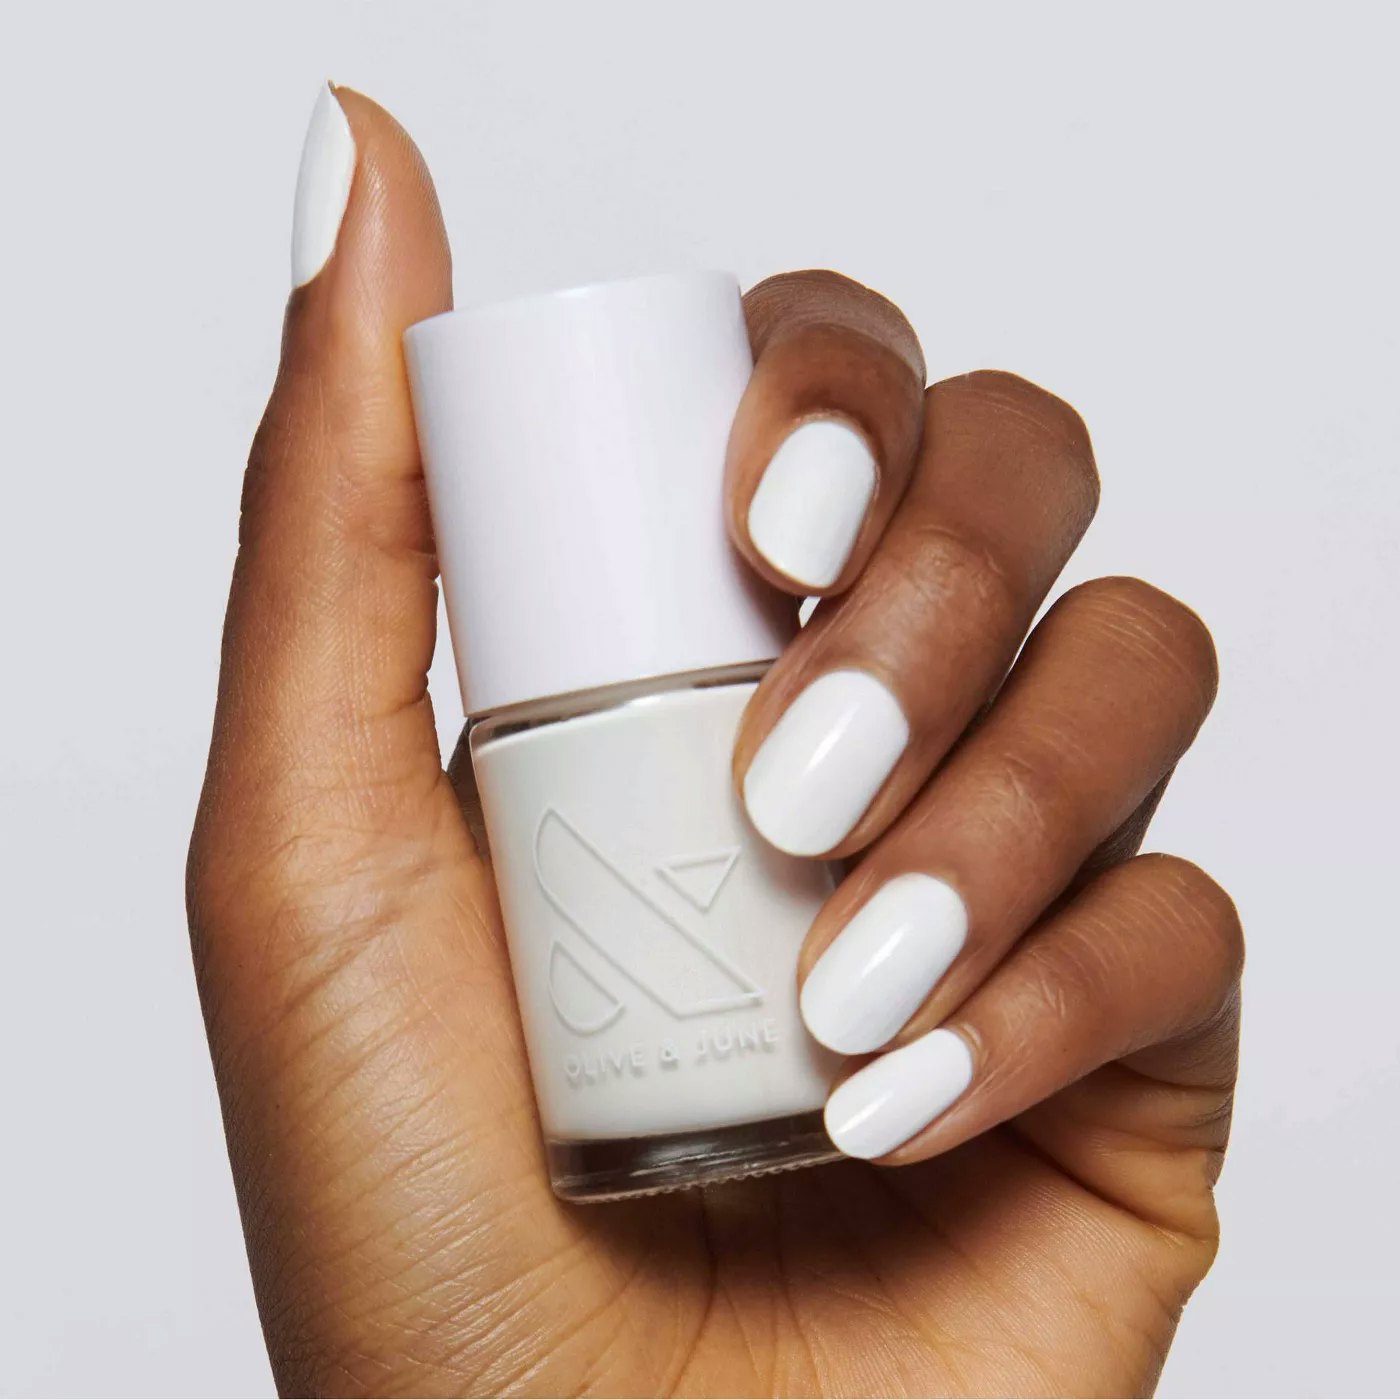 Buy DEBELLE GEL NAIL LACQUER VANILLA CROISSANT ONE COAT WHITE NAIL POLISH-8ML  Online & Get Upto 60% OFF at PharmEasy